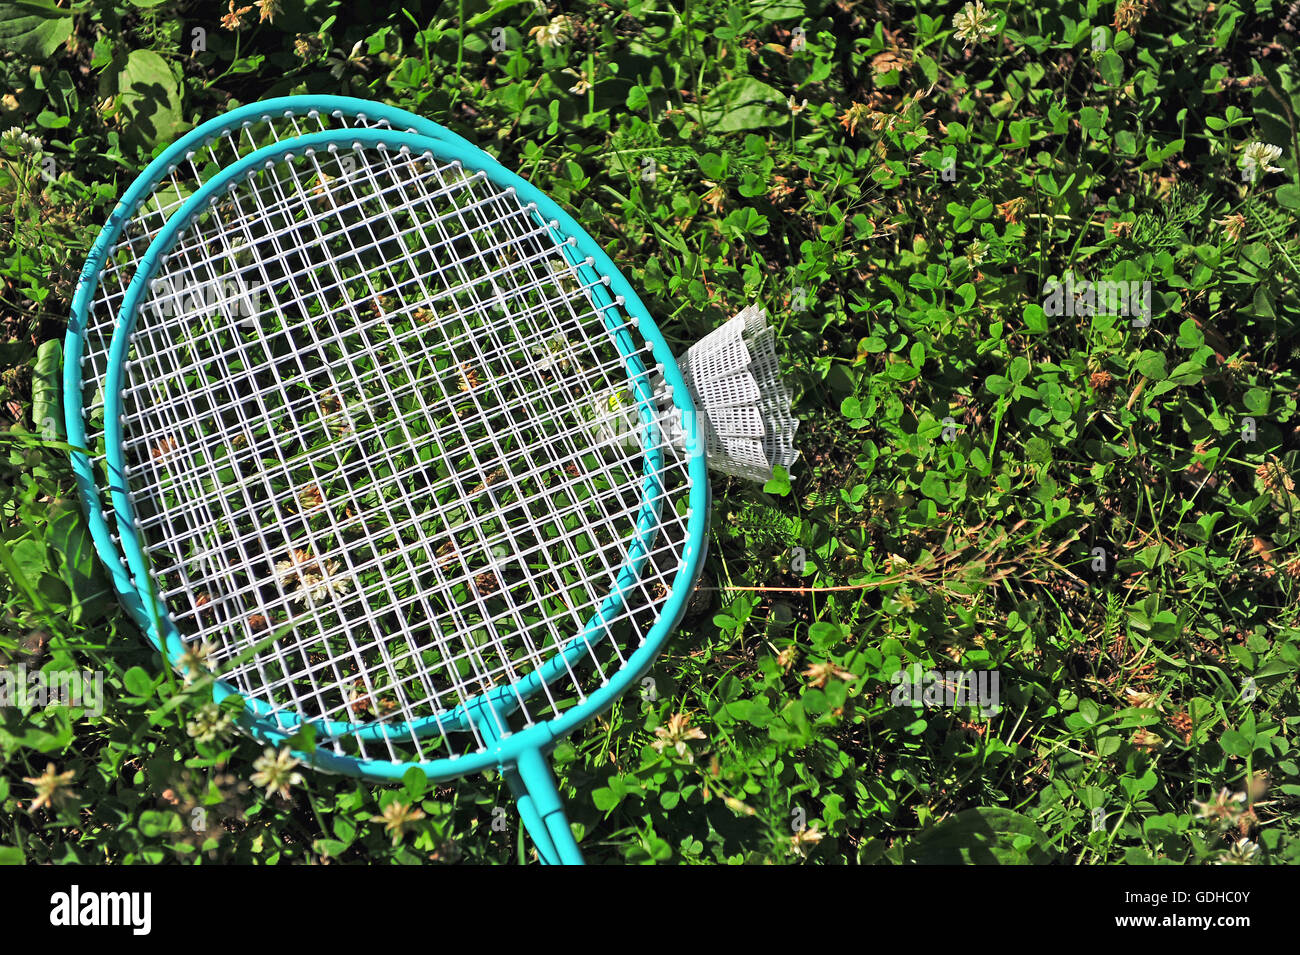 Badminton rackets and shuttle in the grass Stock Photo